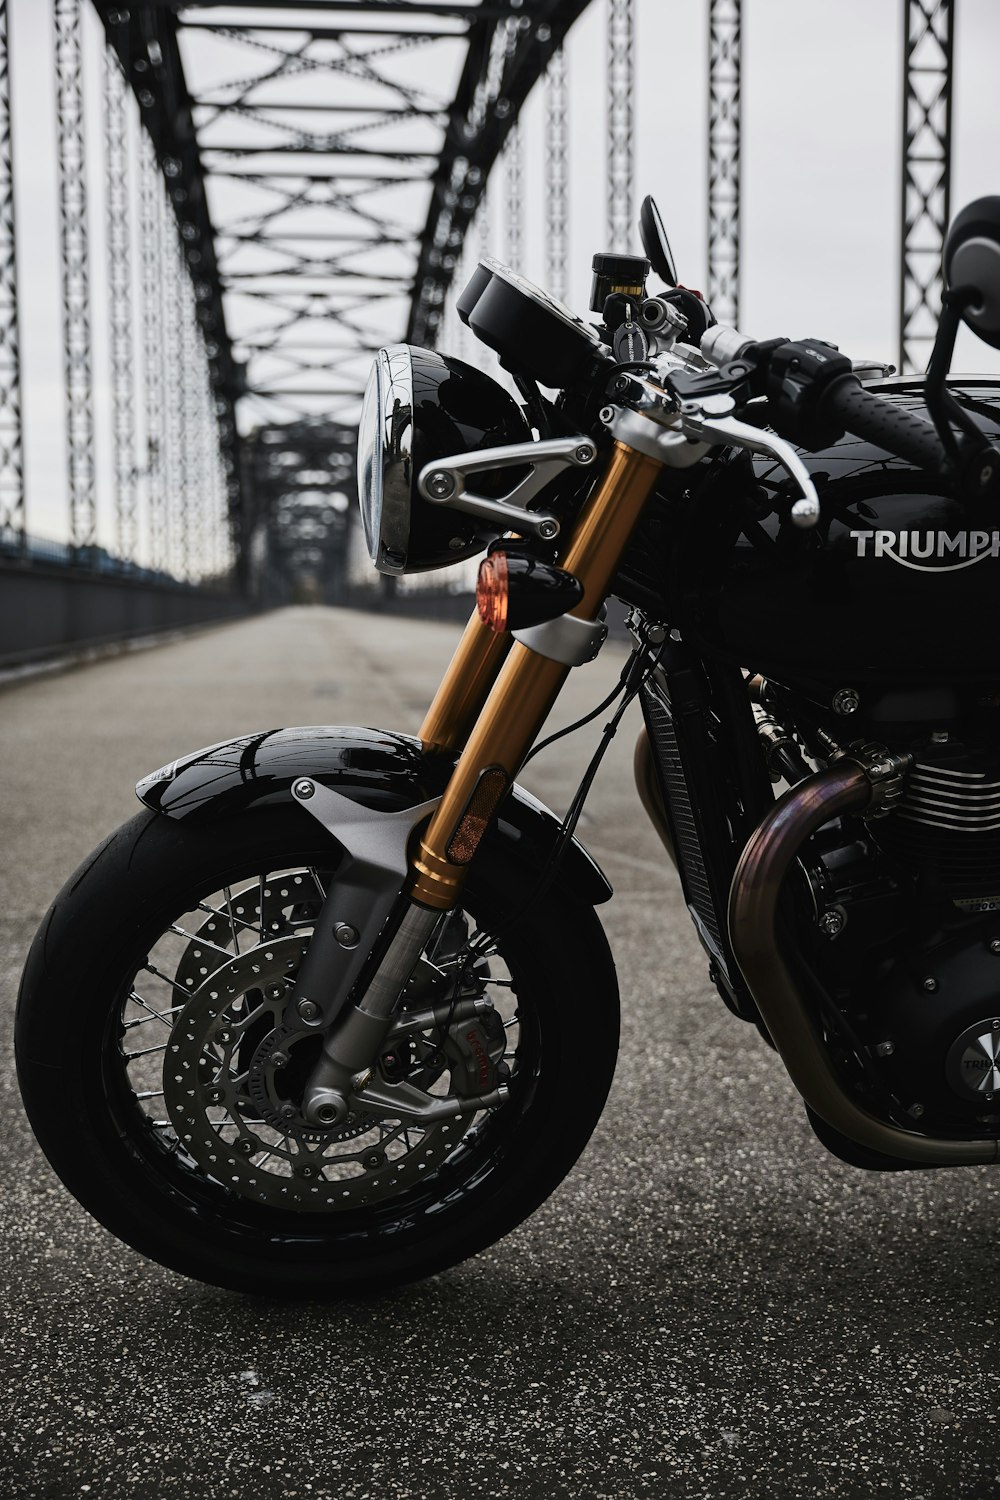 Triumph Motorcycle Pictures | Download Free Images on Unsplash